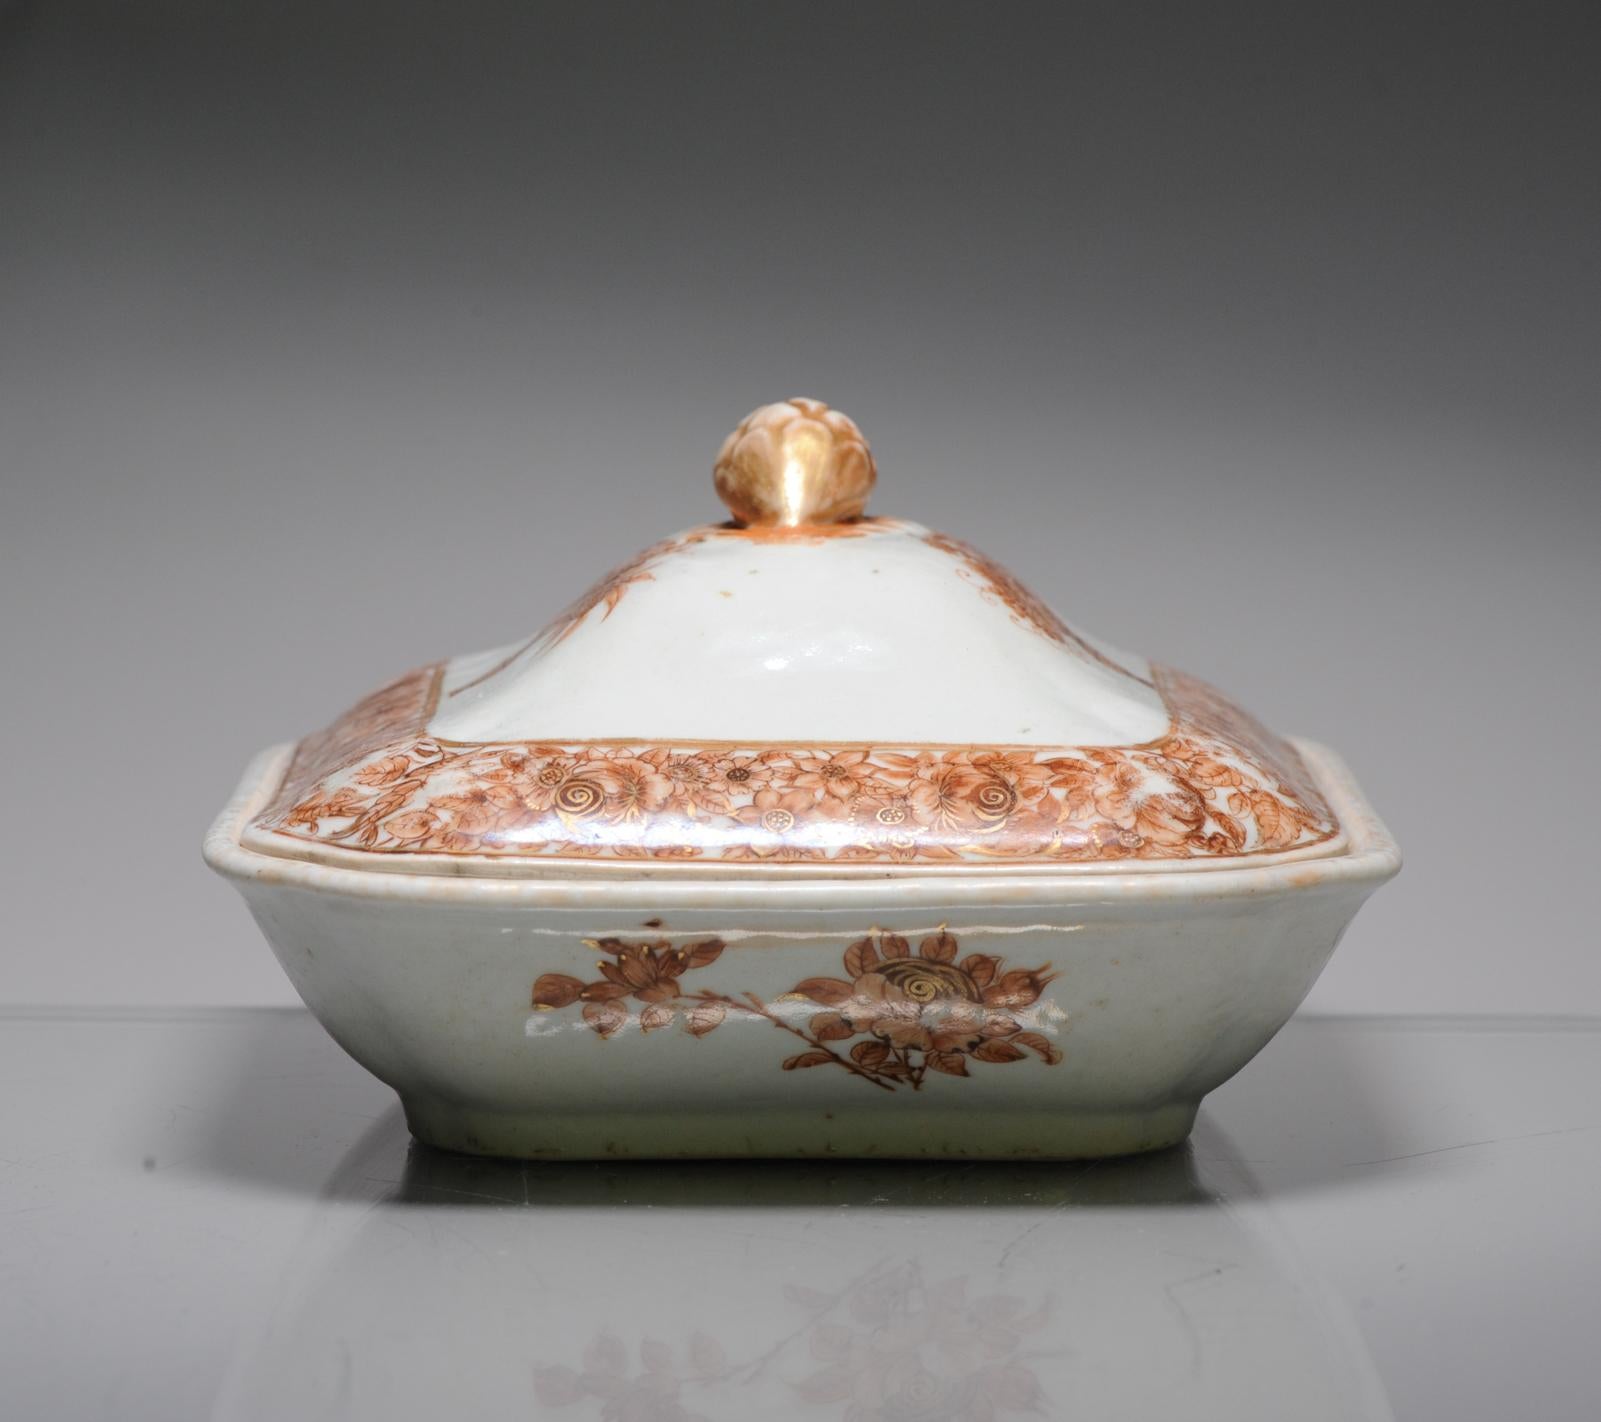 Antique 18C Large Tureen Qing Chinese Porcelain Chine de Commande Sepia In Good Condition For Sale In Amsterdam, Noord Holland